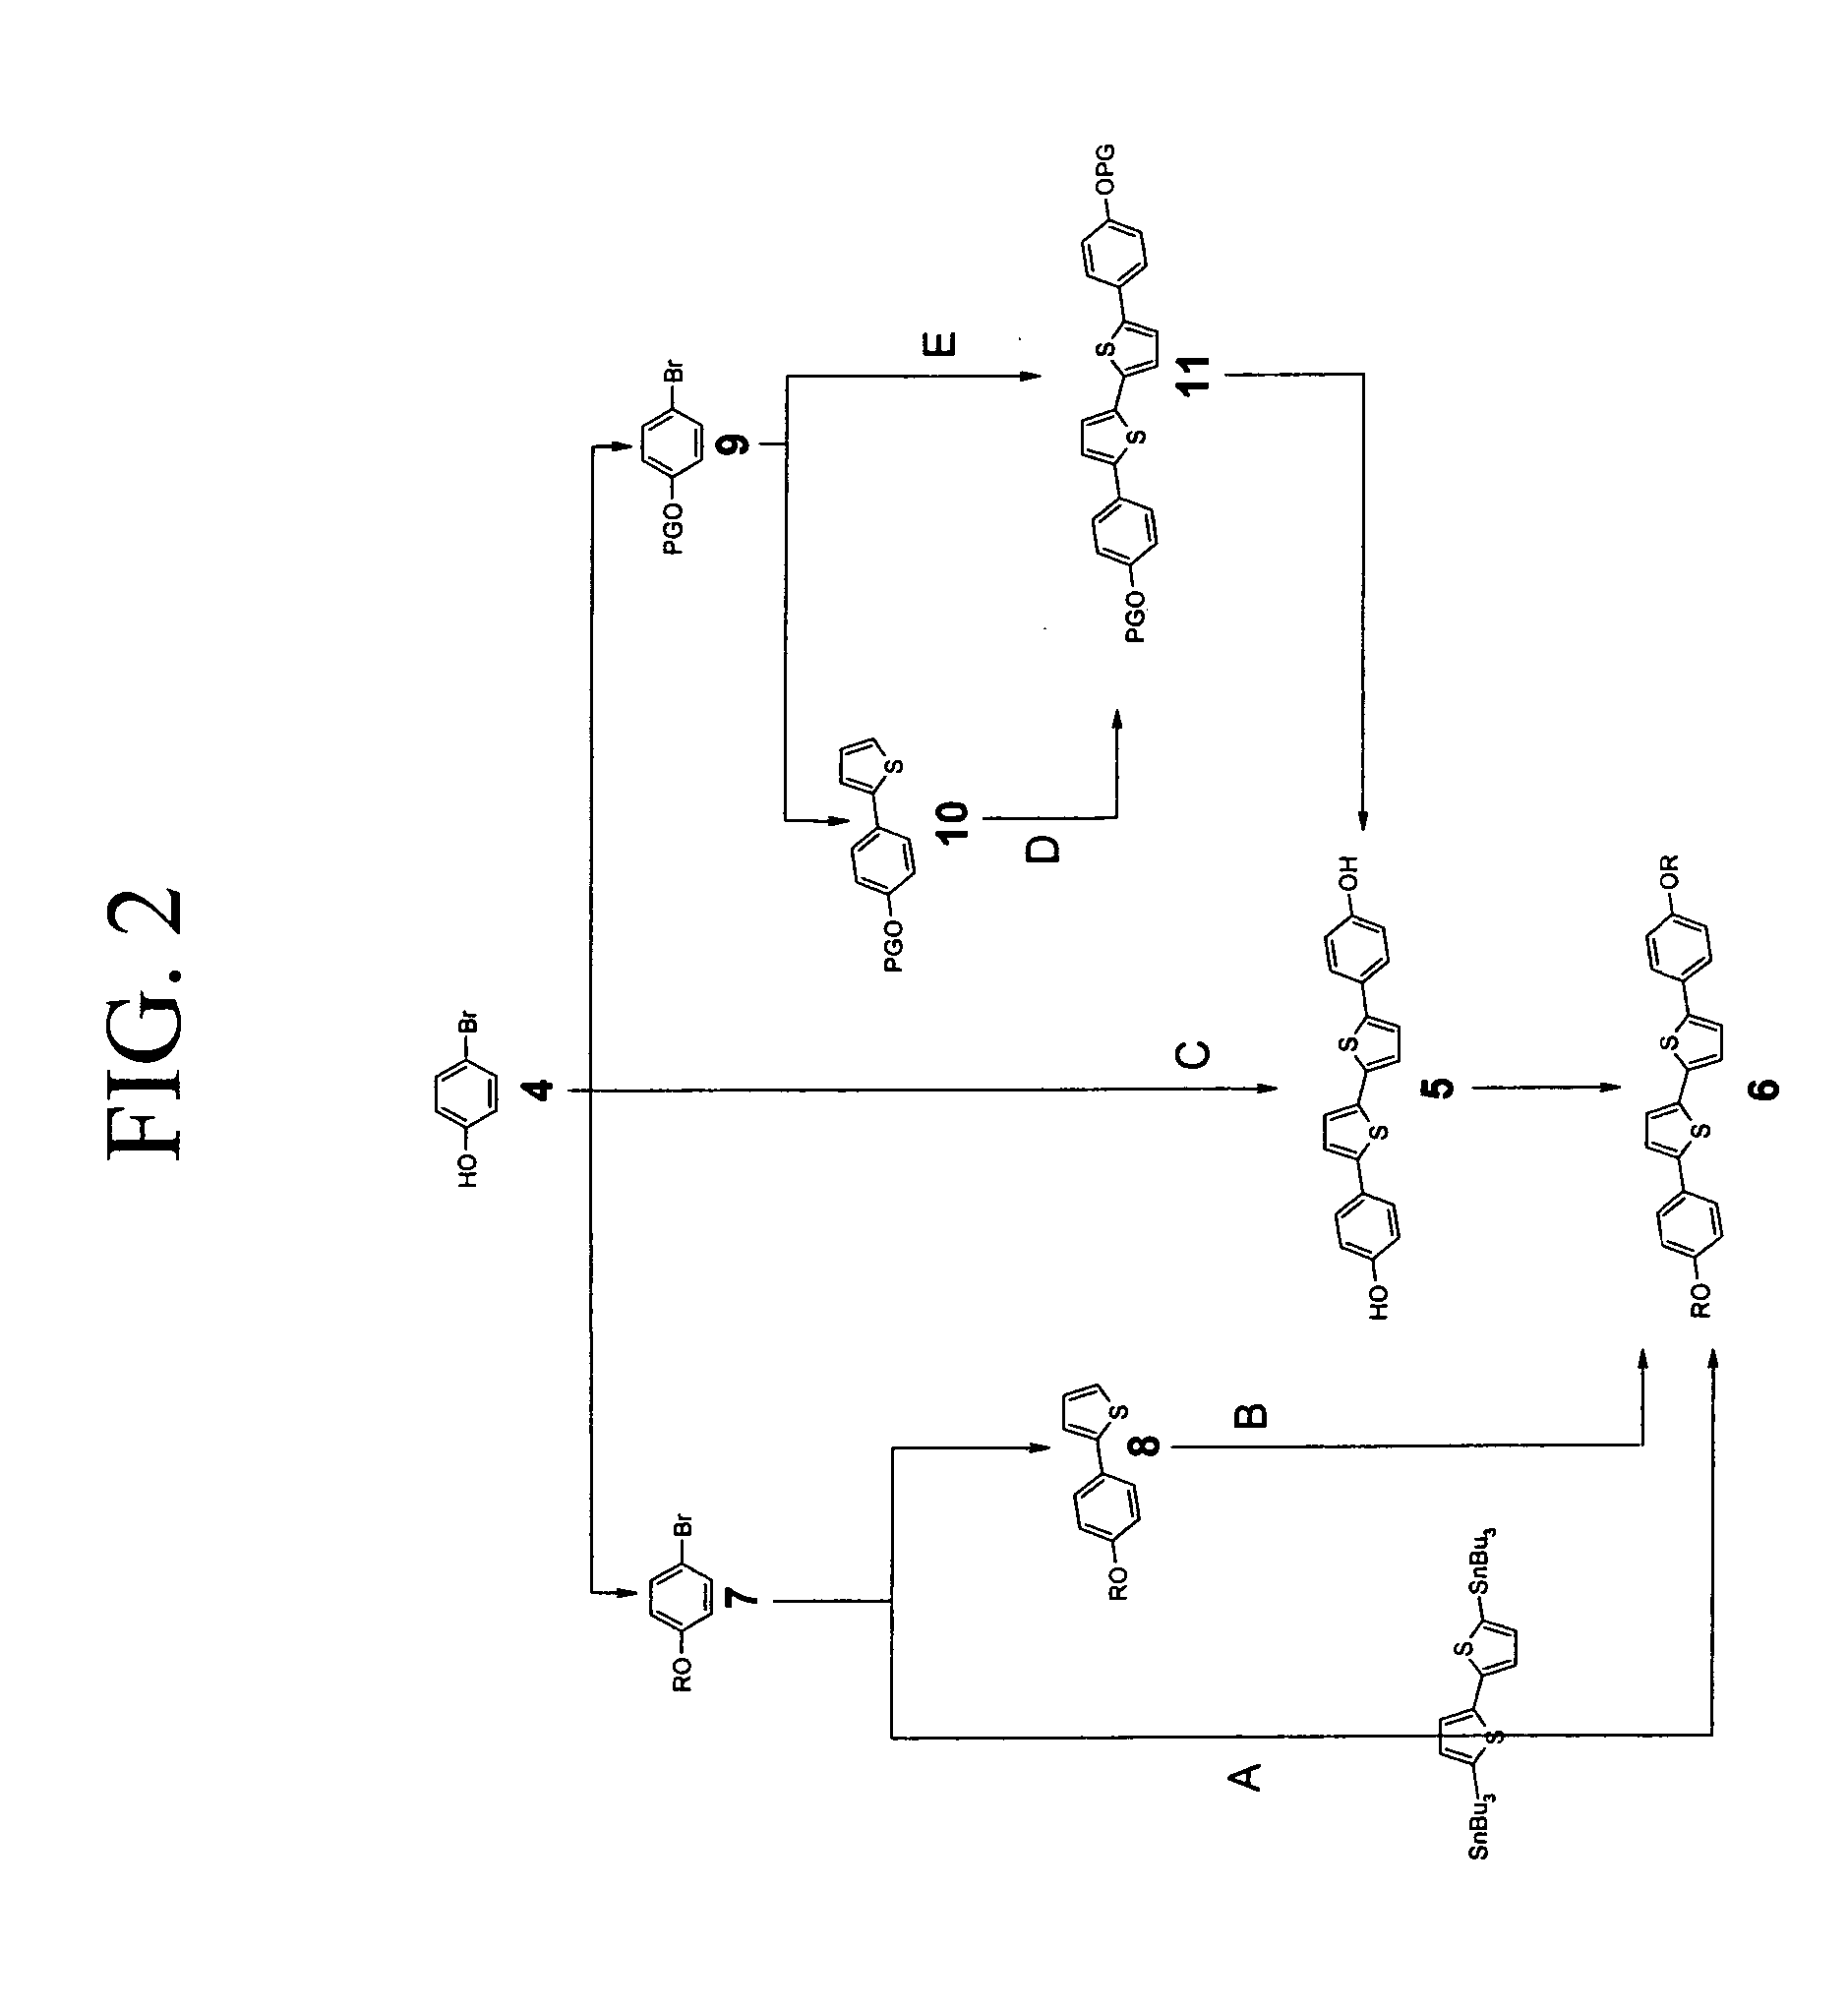 Liquid phase fabrication of active devices including organic semiconductors